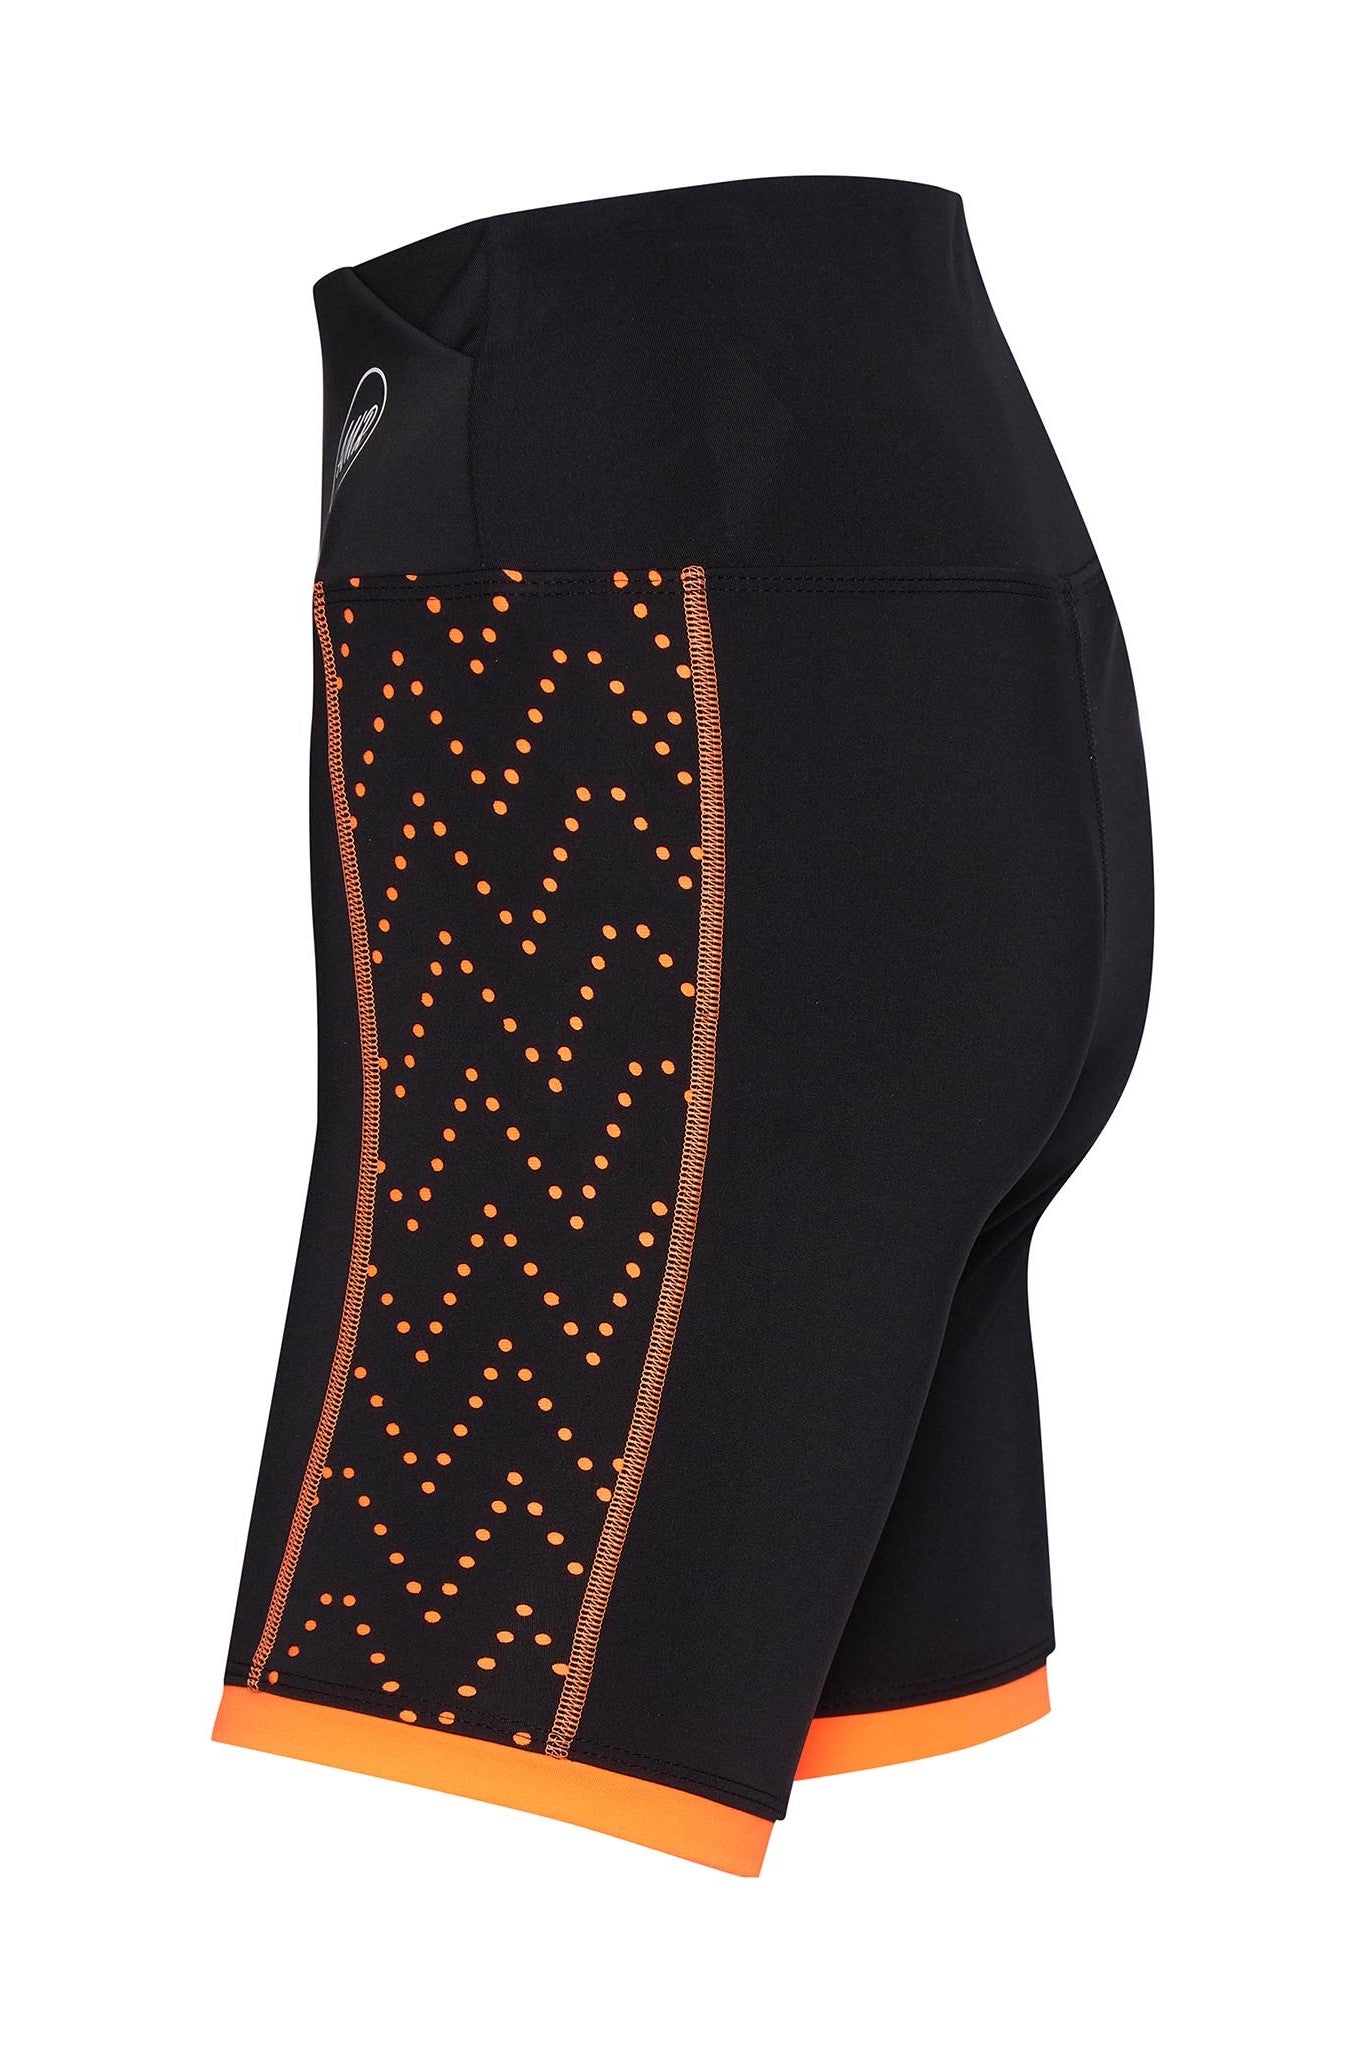 Perforated Neon Pocket Shorts